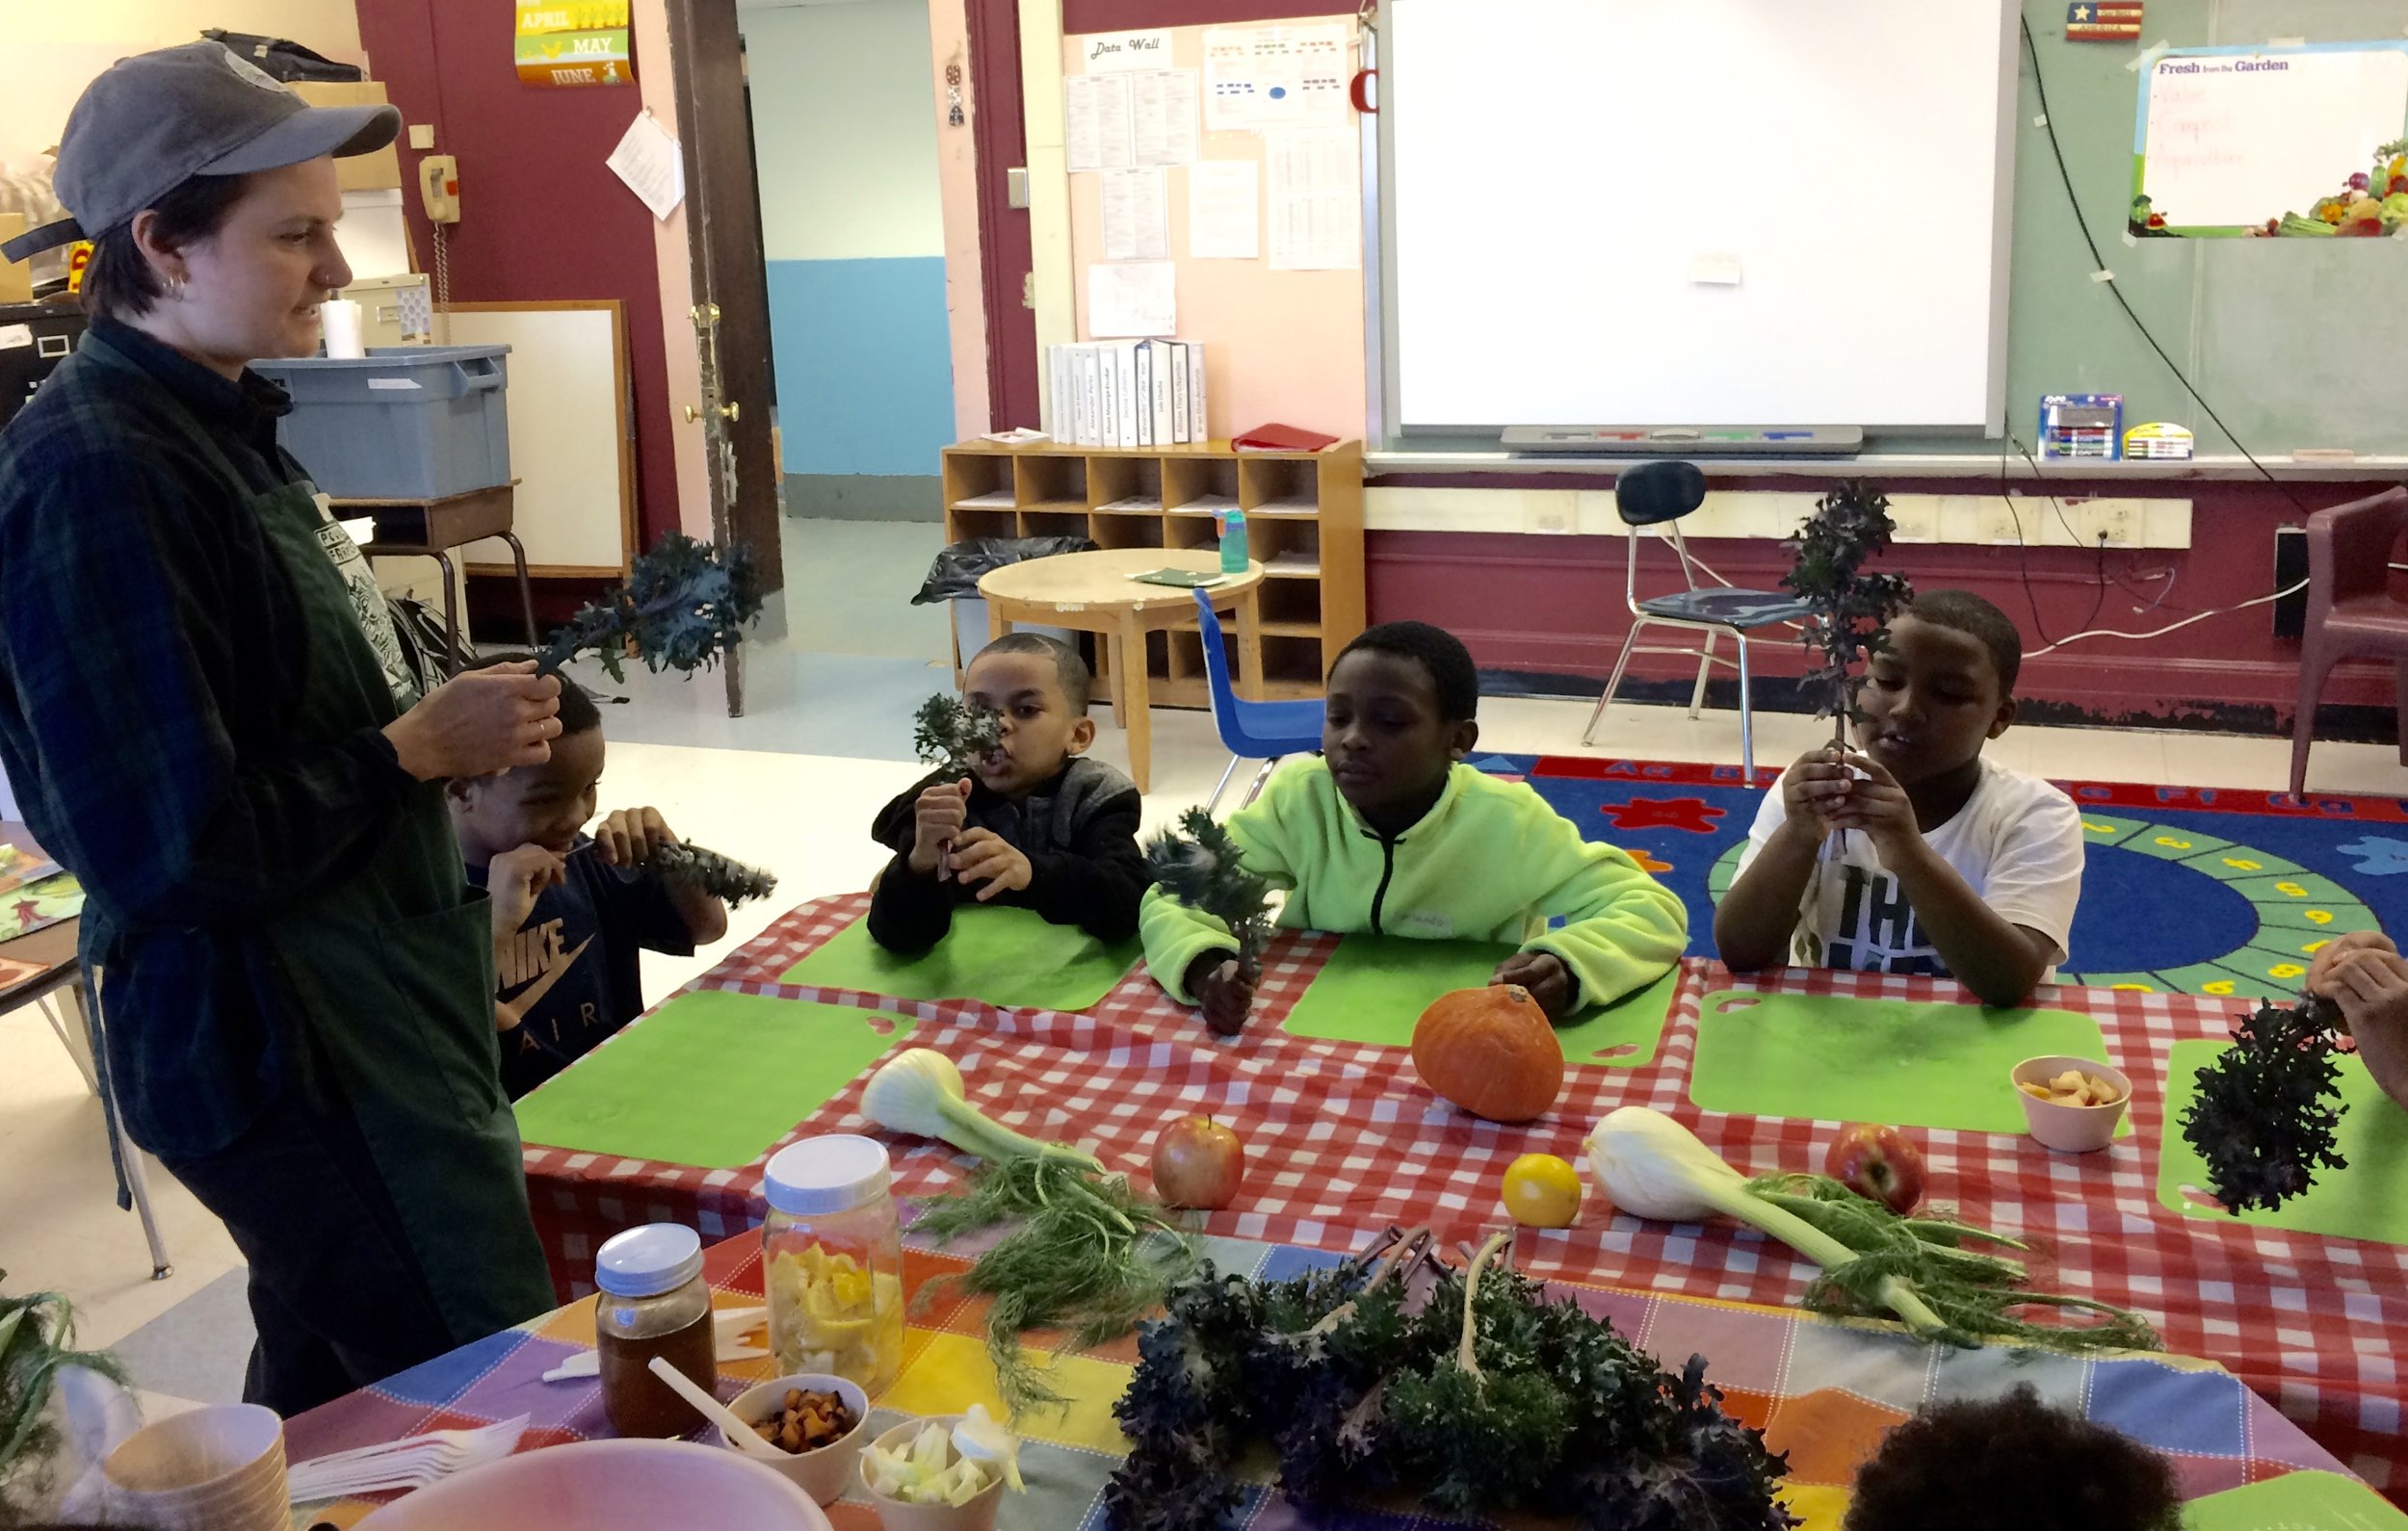  Morse students learn to prepare kale salad     